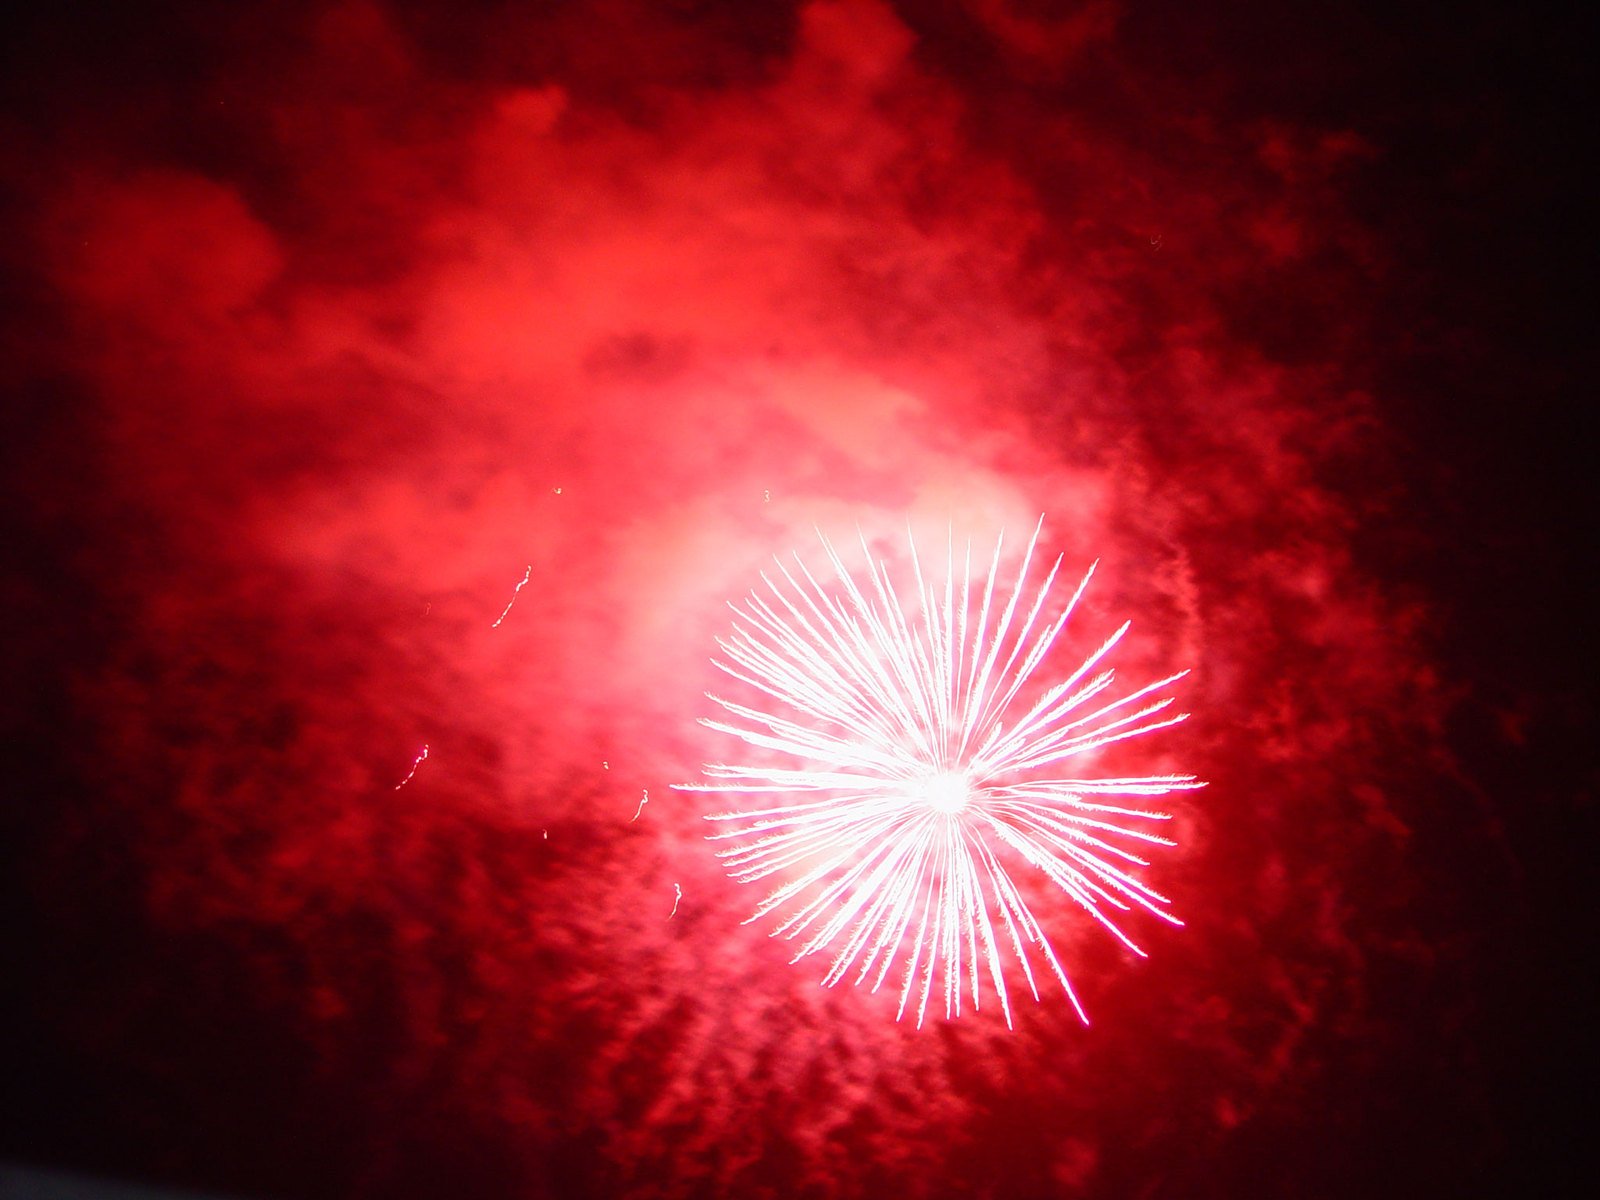 red fireworks in the sky with a black background